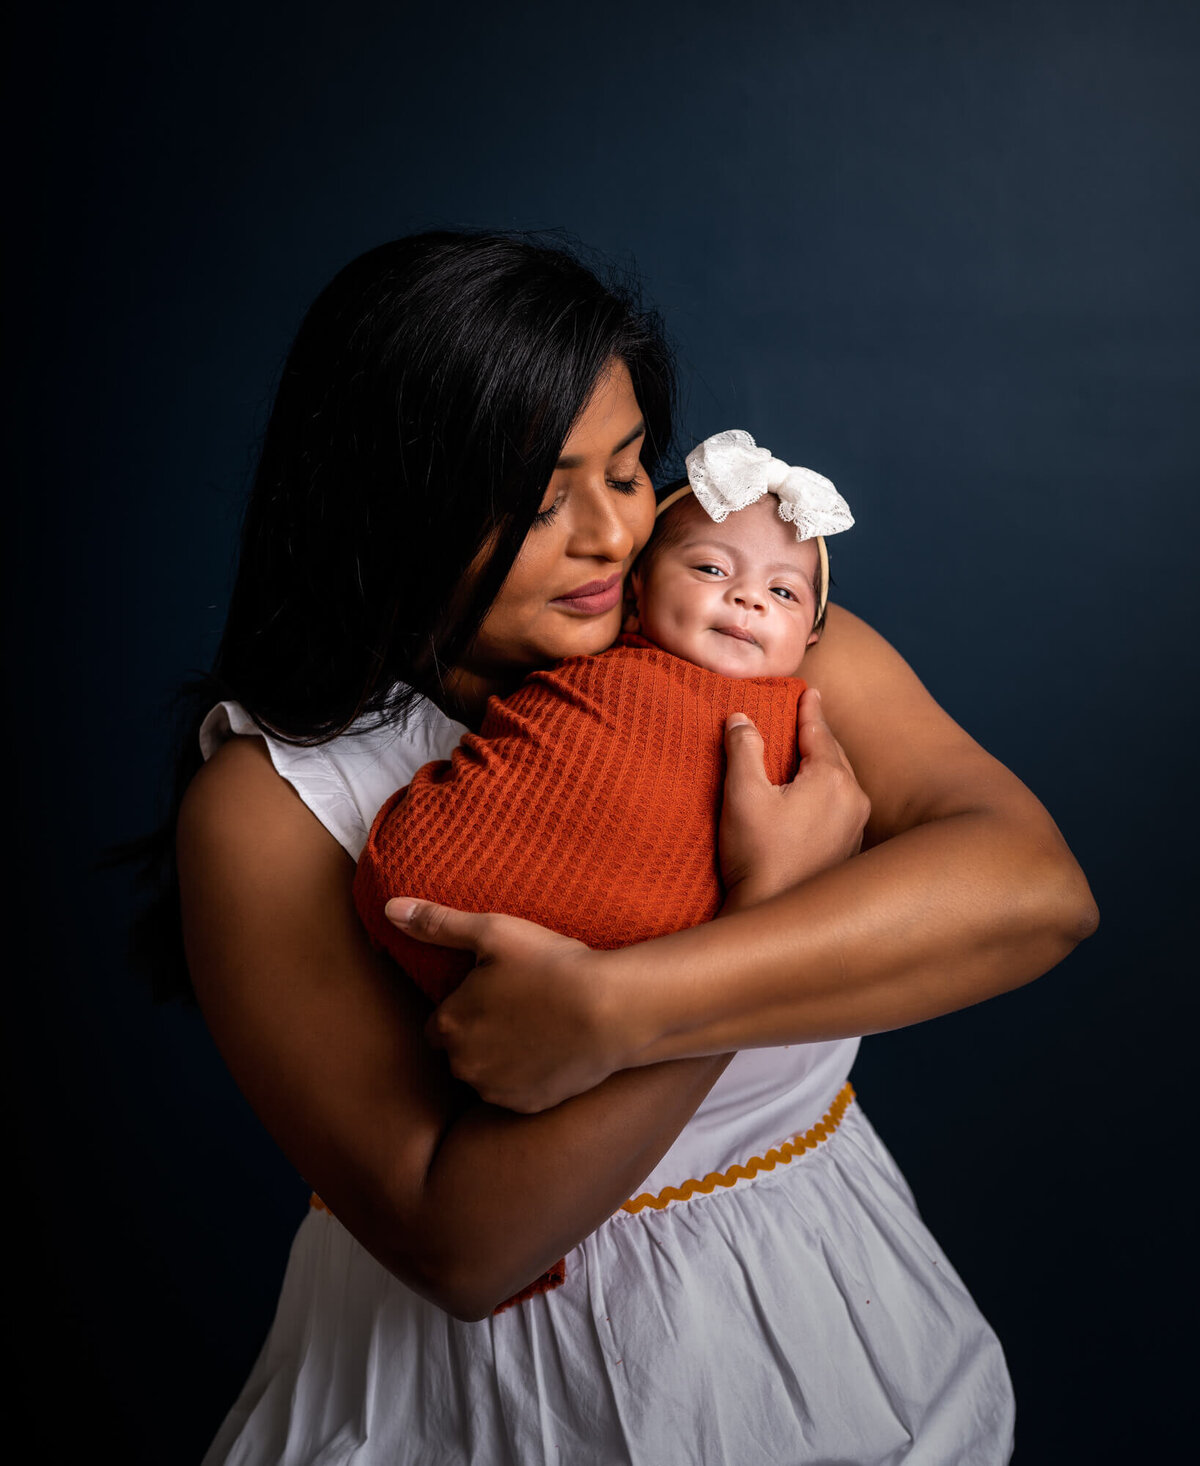 A new mama cuddles her newborn baby daughter who is wrapped in an orange blanket r